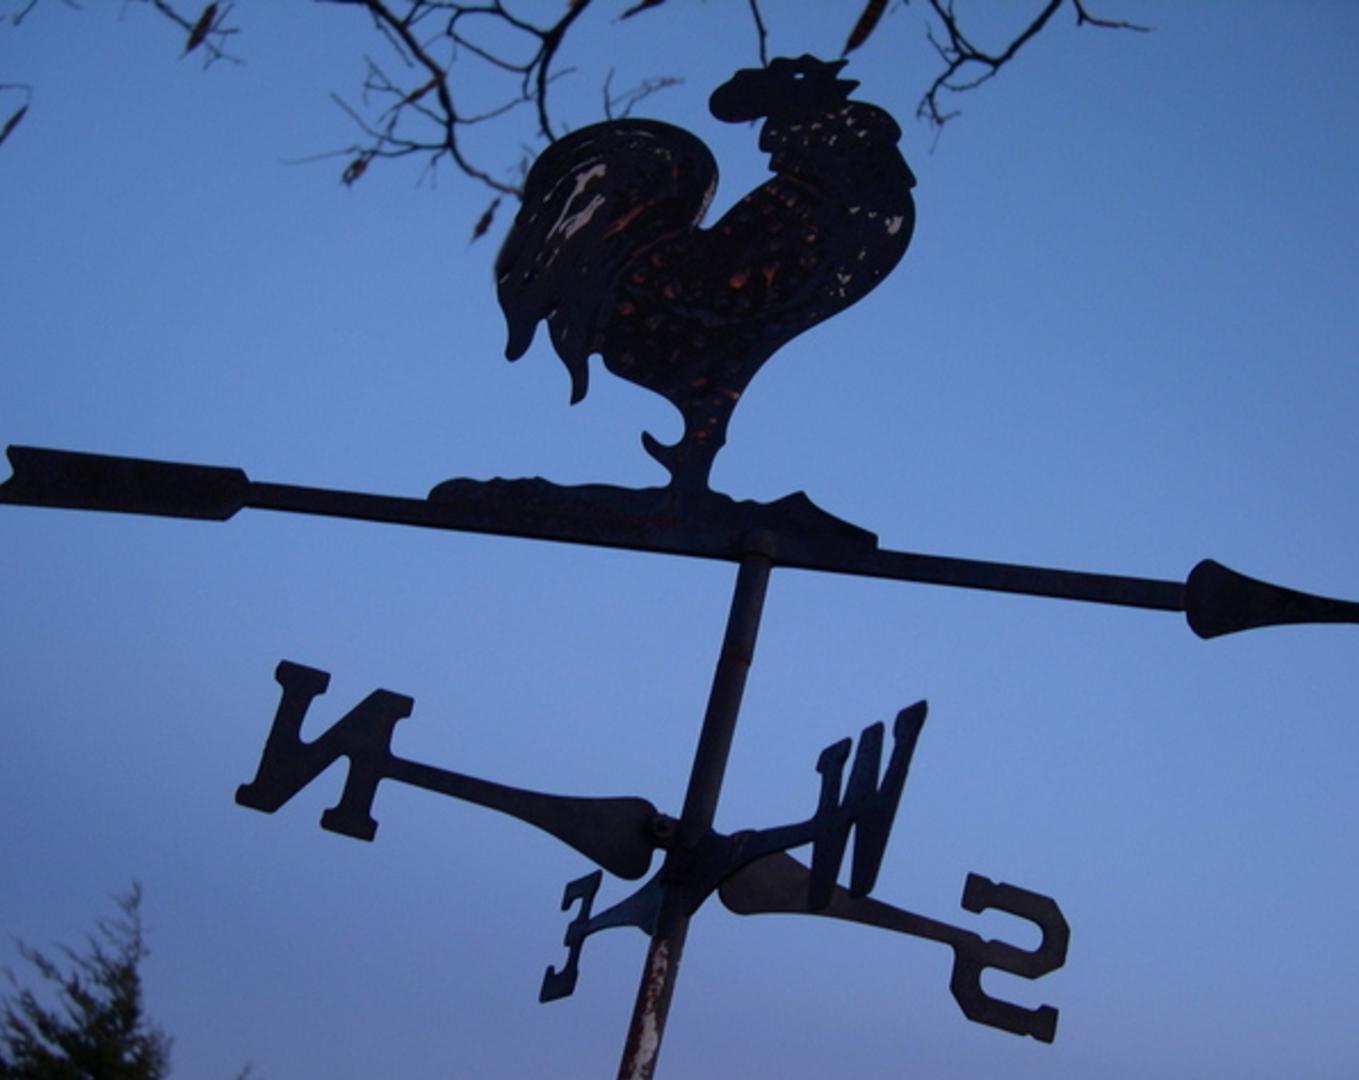 rooster-shaped weathervane in lavender dawn